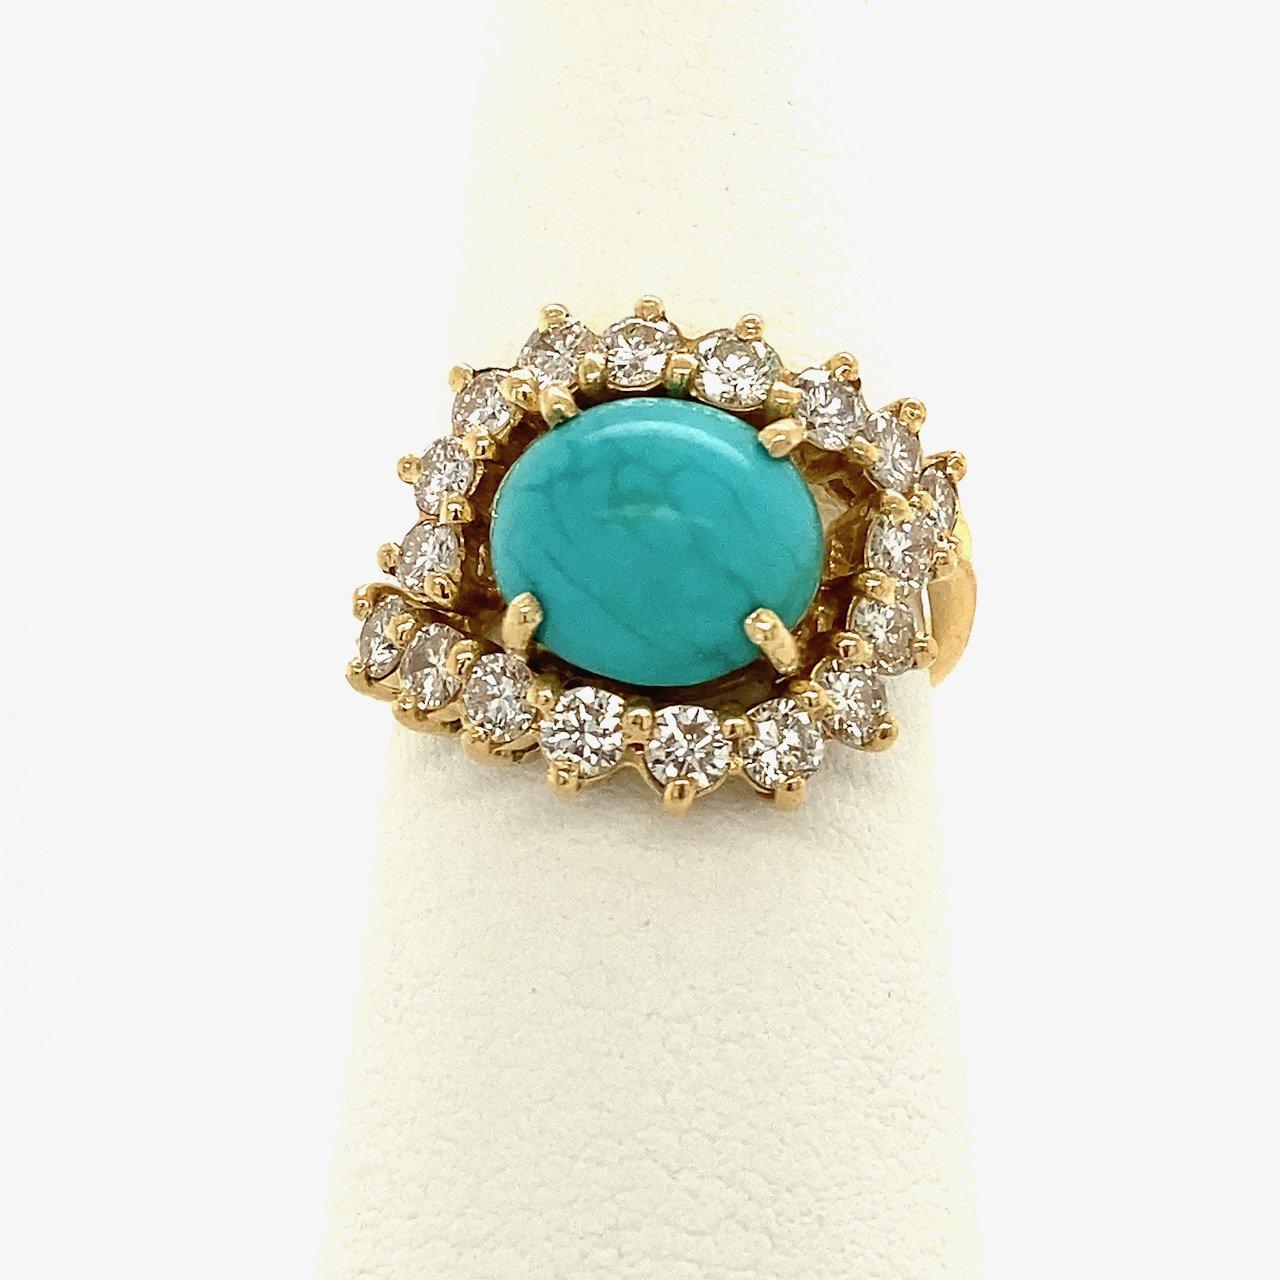 This 18KT yellow gold vintage turquoise ring dates from the 1960s. The center turquoise measures approximately 9.5mm x 8.5mm and is surrounded by approximately 1.25CT round diamonds, H-I Color VS - SI Clarity. The ring is a size 6.5 and weighs 5.6